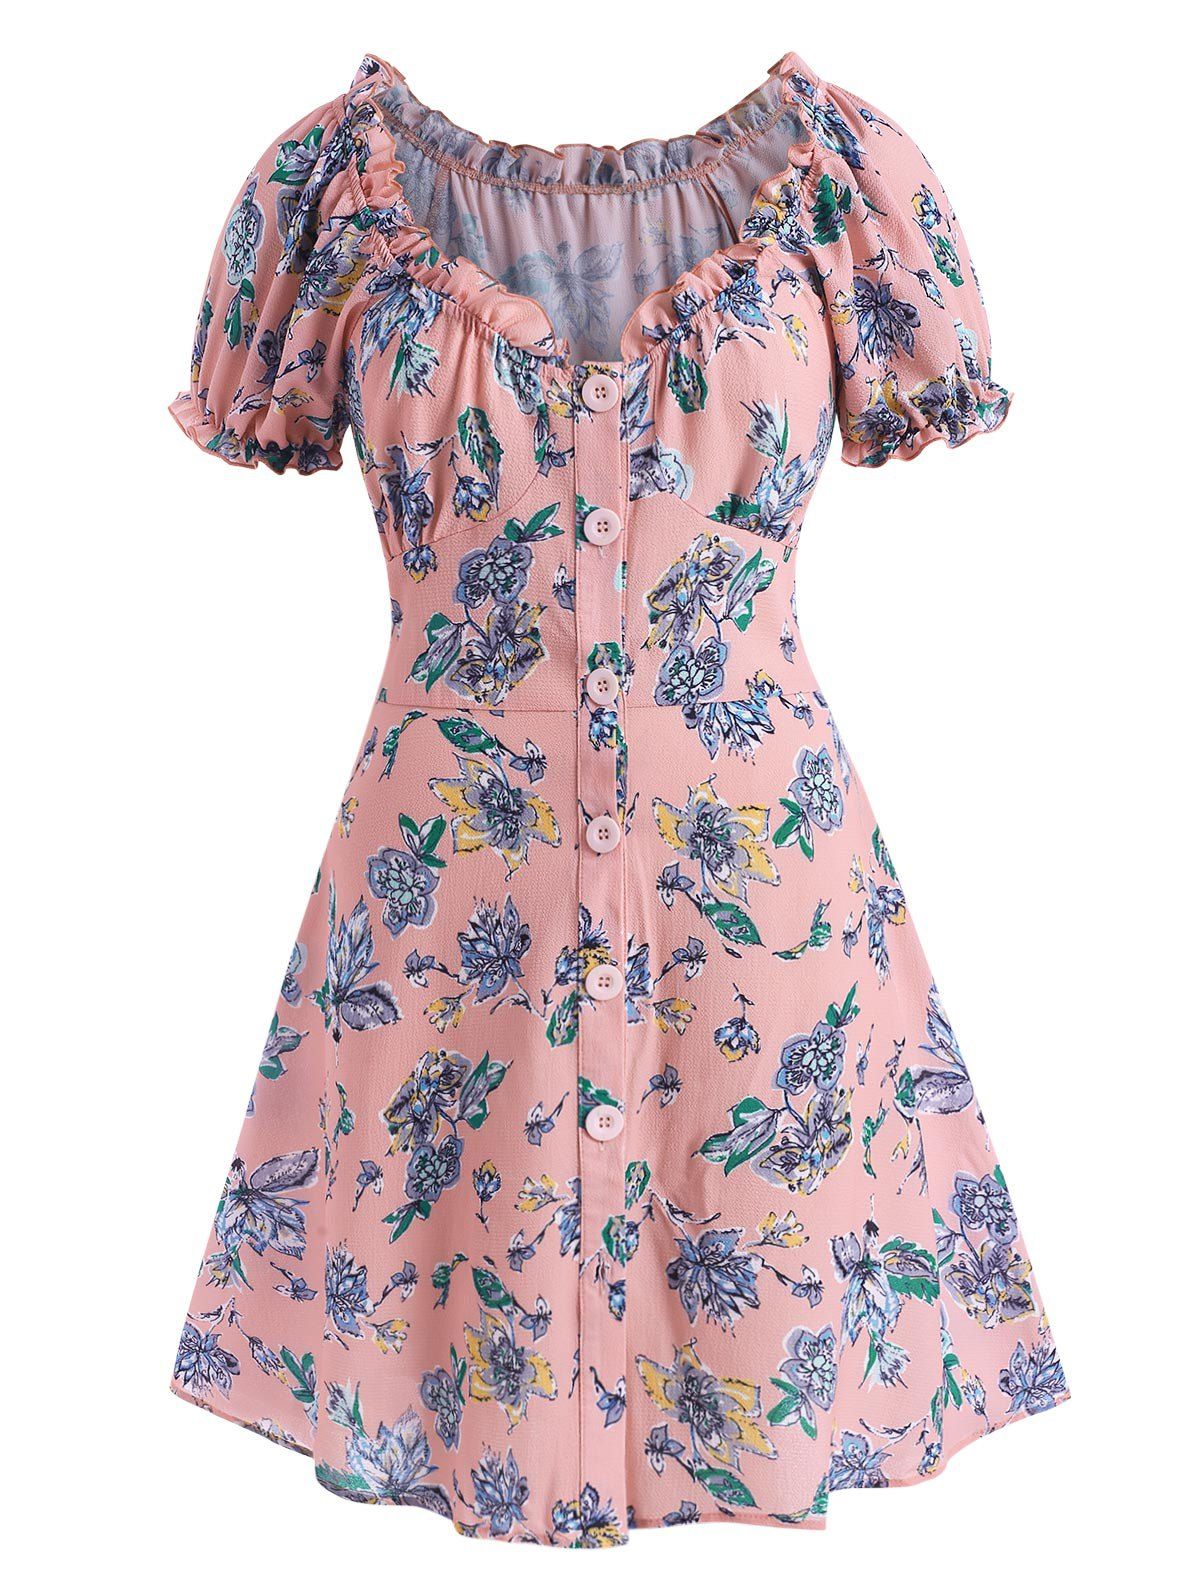 Plus Size Floral Frilled Button Down Puff Sleeve Textured Dress - LIGHT PINK L